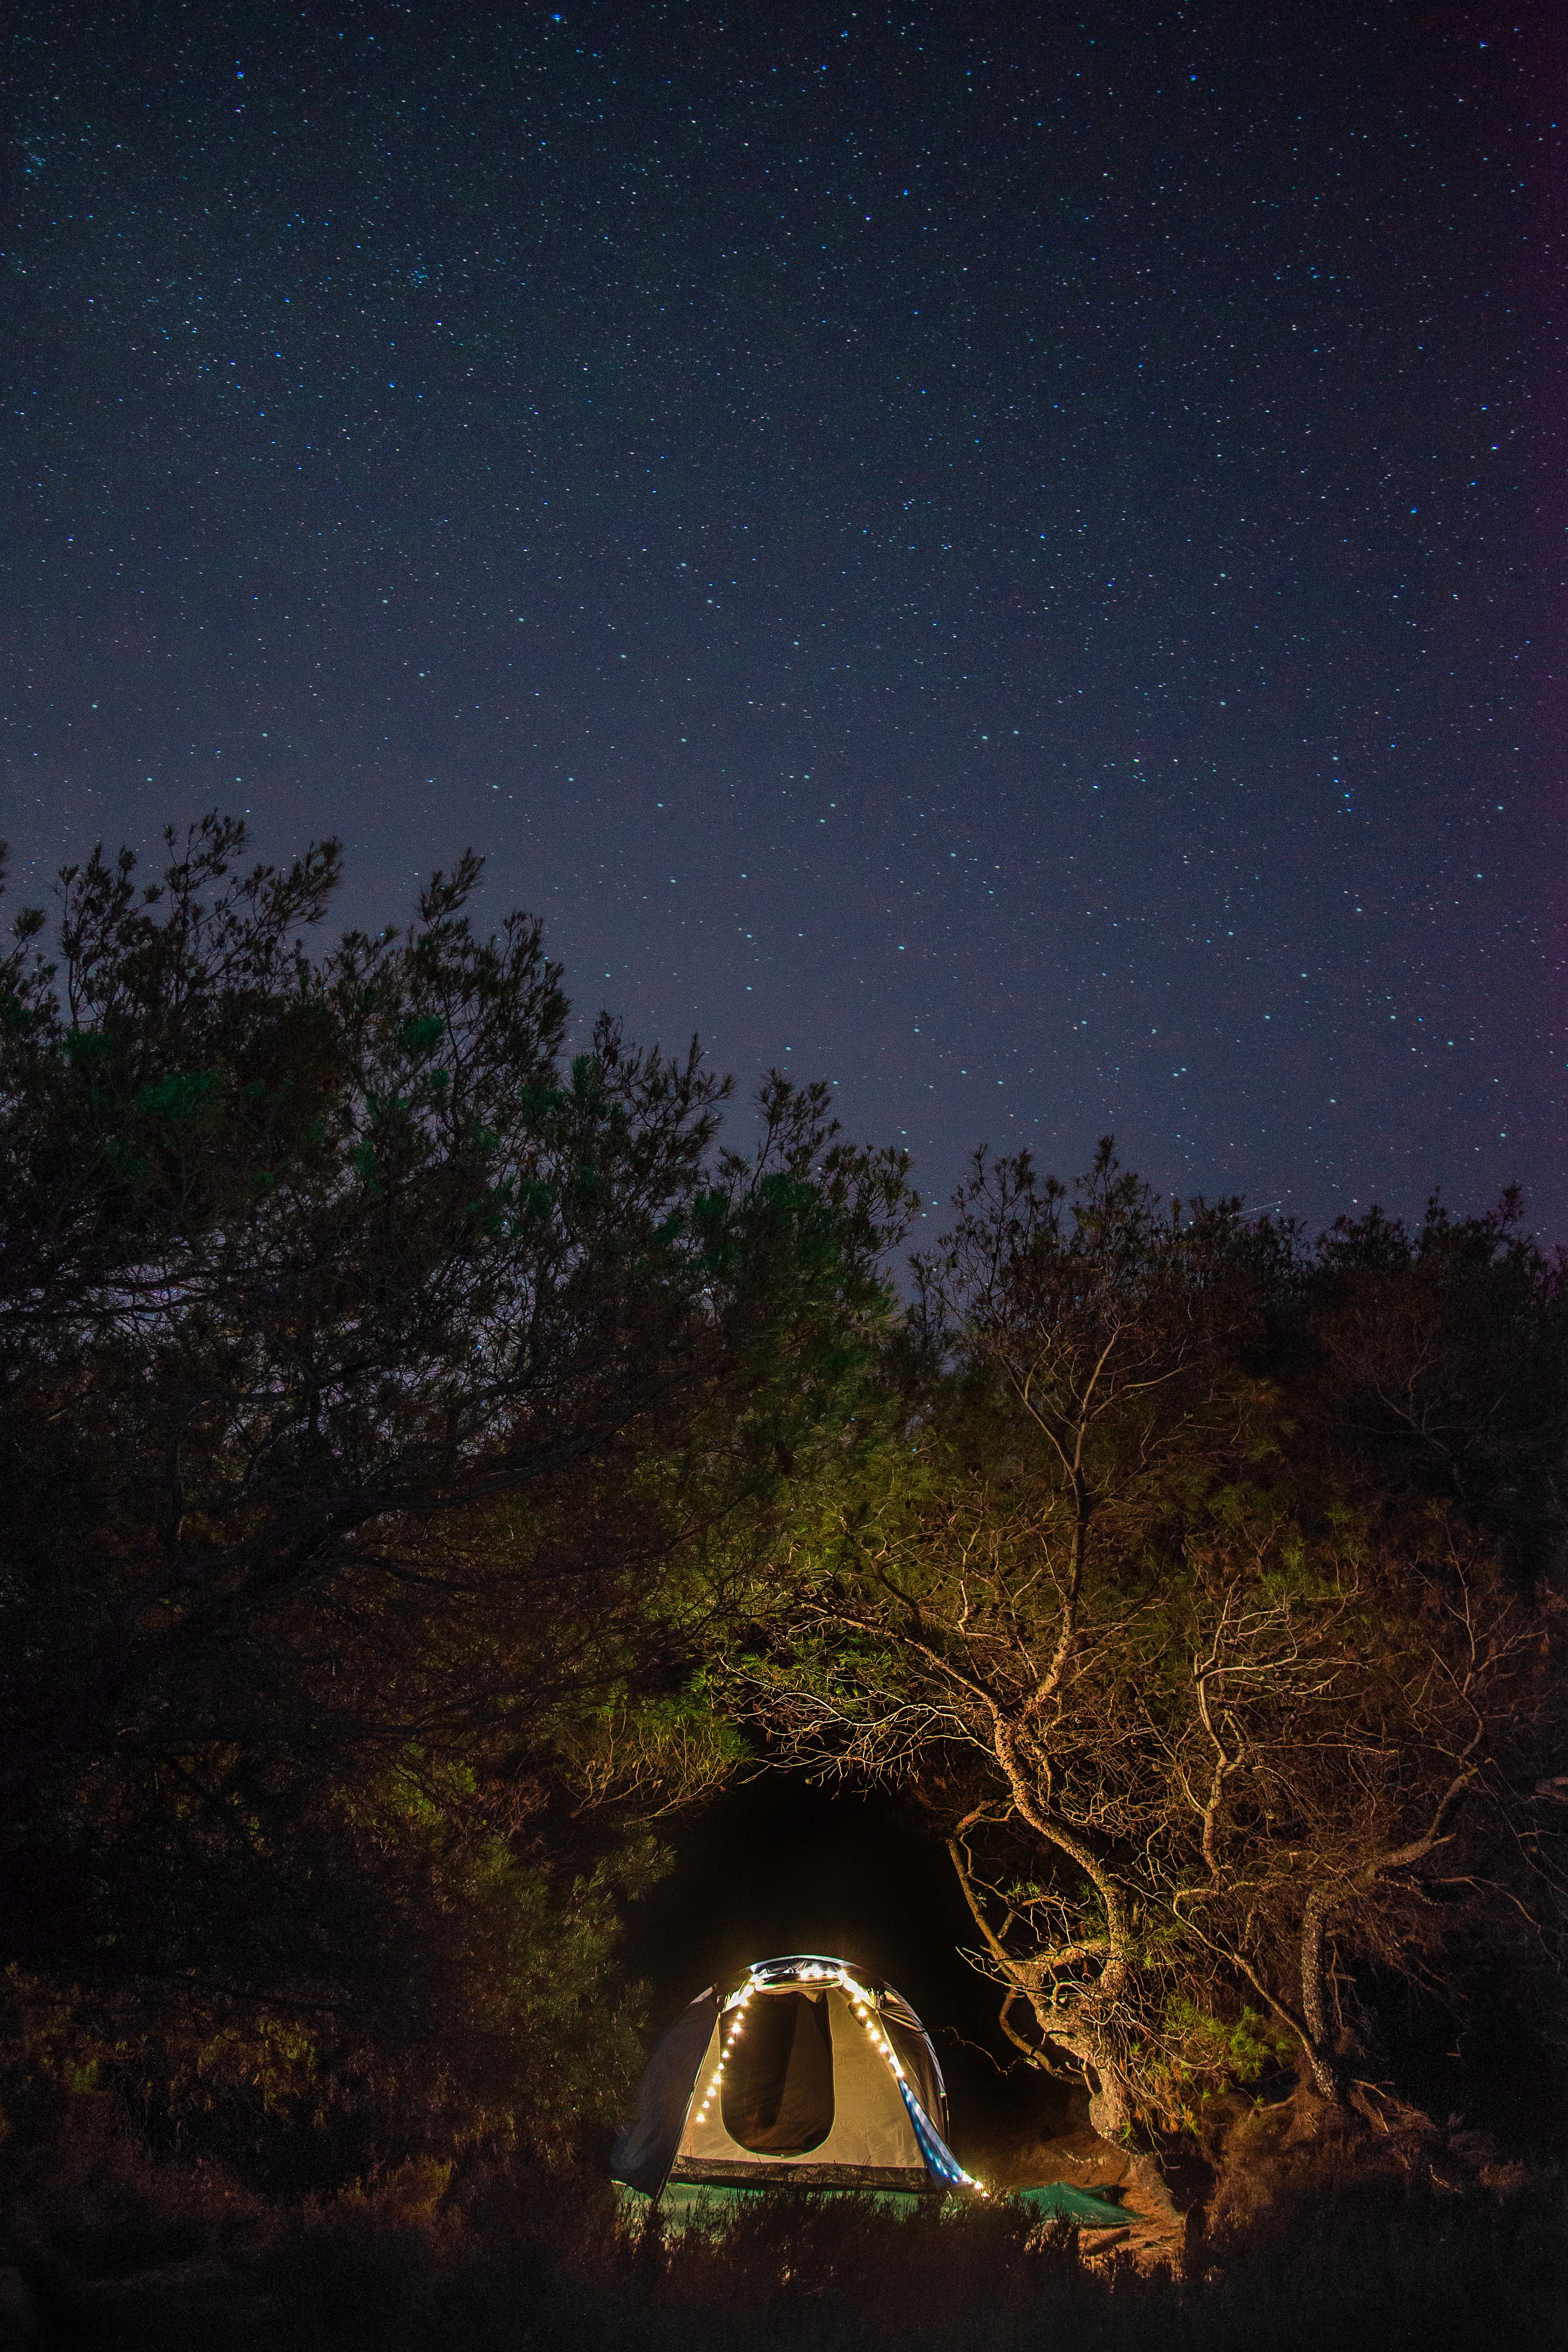 campsite, dark, trees, night, starry sky, tent, camping phone background